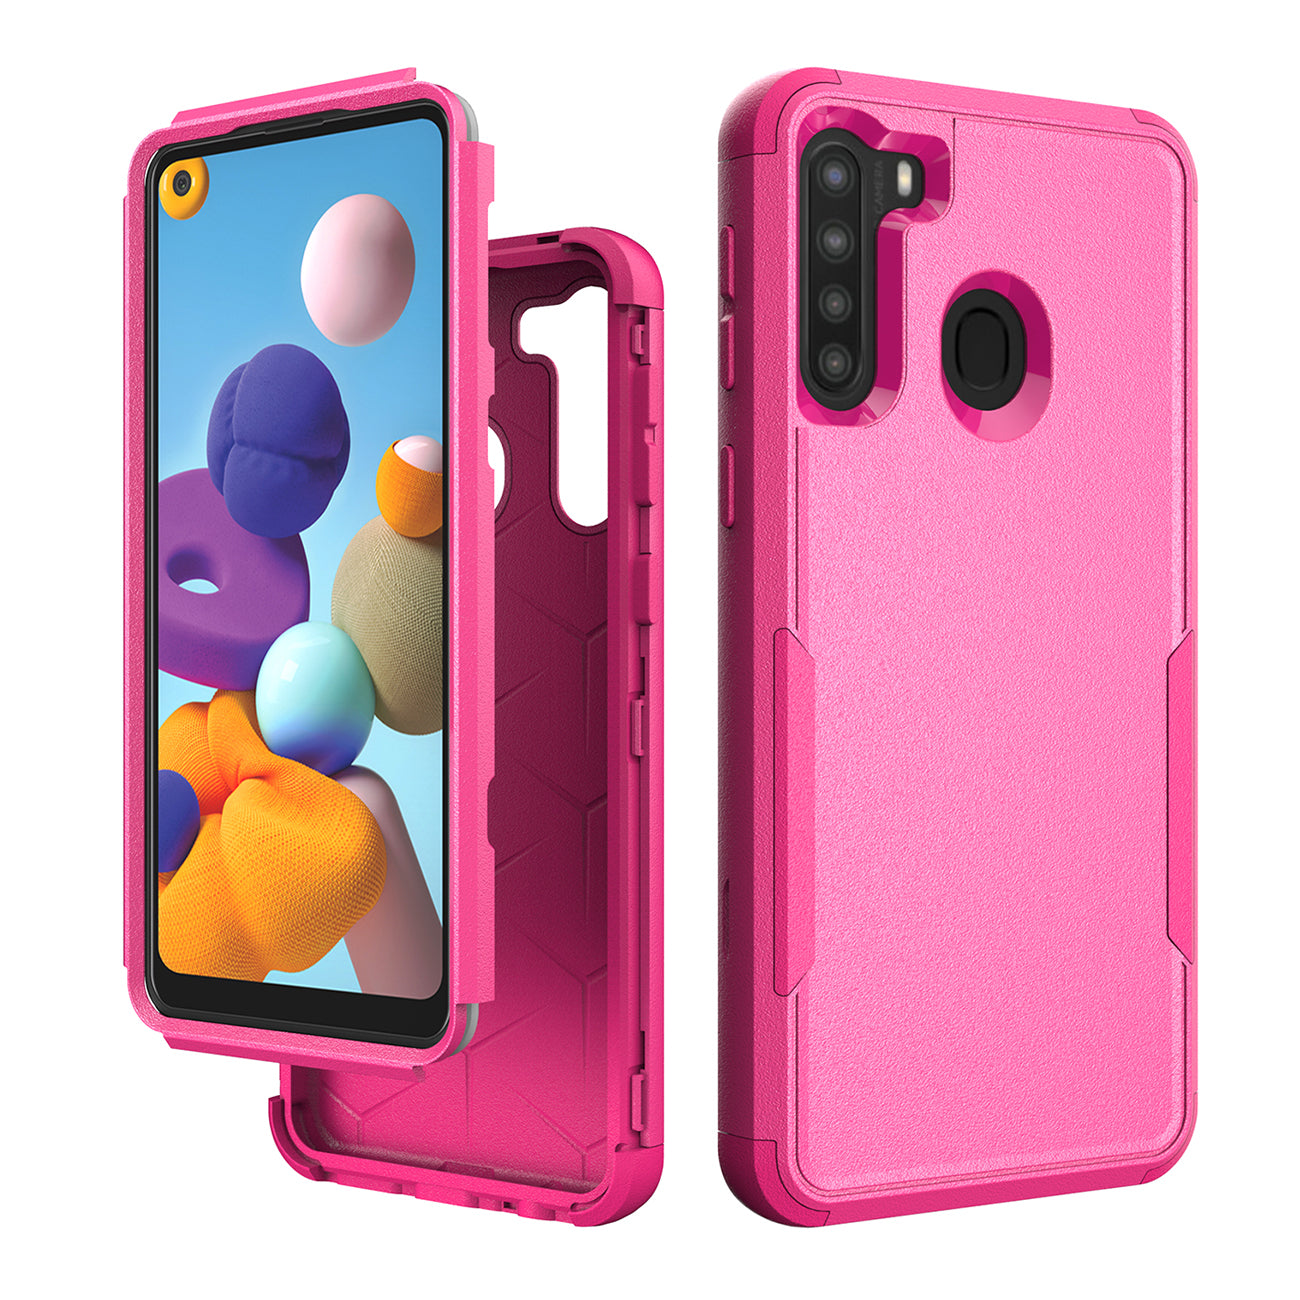 3in1 Hybrid Heavy Duty Defender Rugged Armor Military Grade Case For SAMSUNG GALAXY A21 In Hot pink